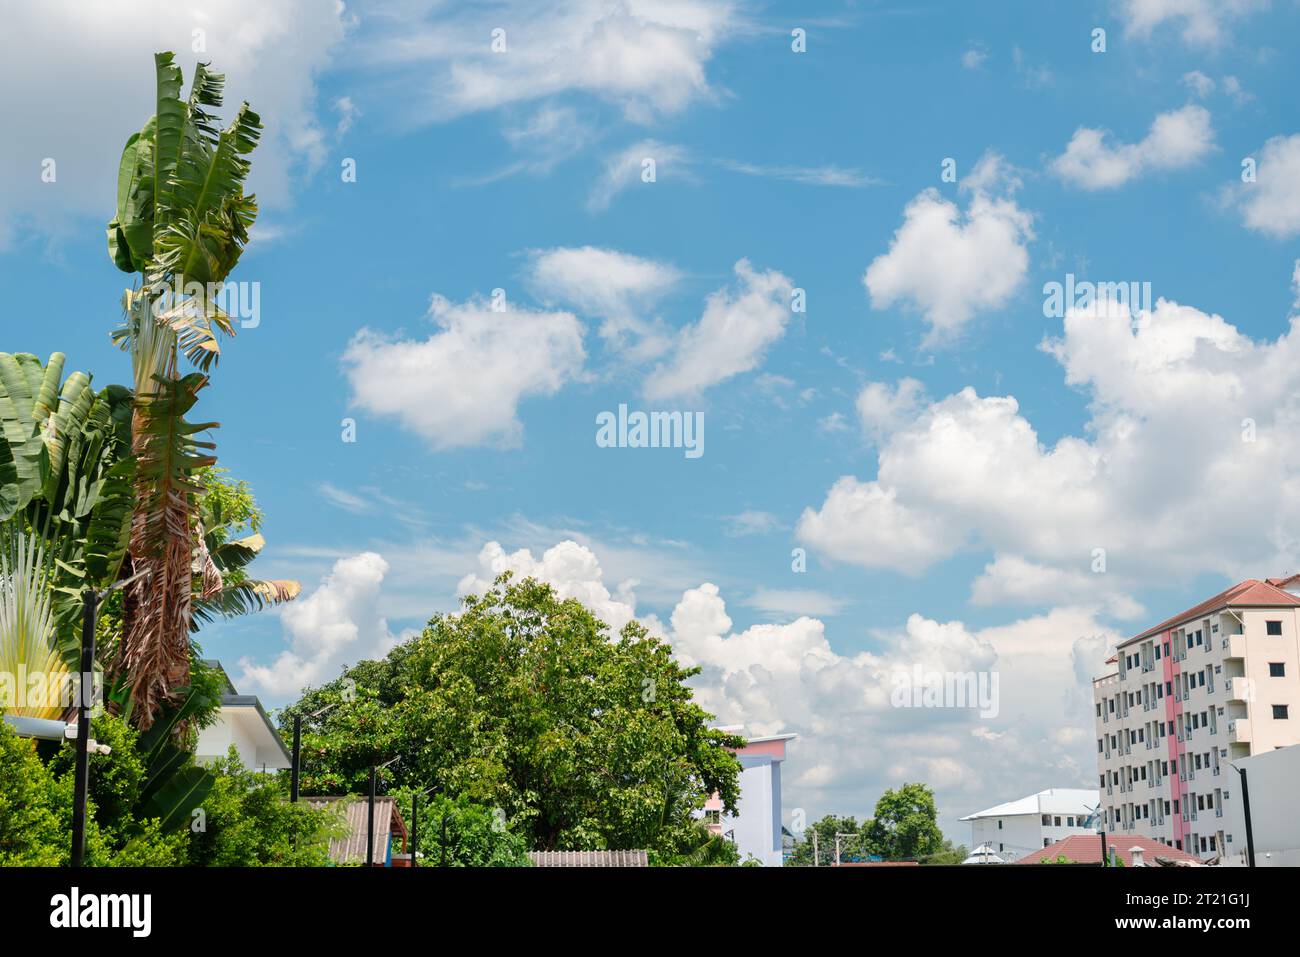 Chiang Mai city and tropical tree in Thailand Stock Photo